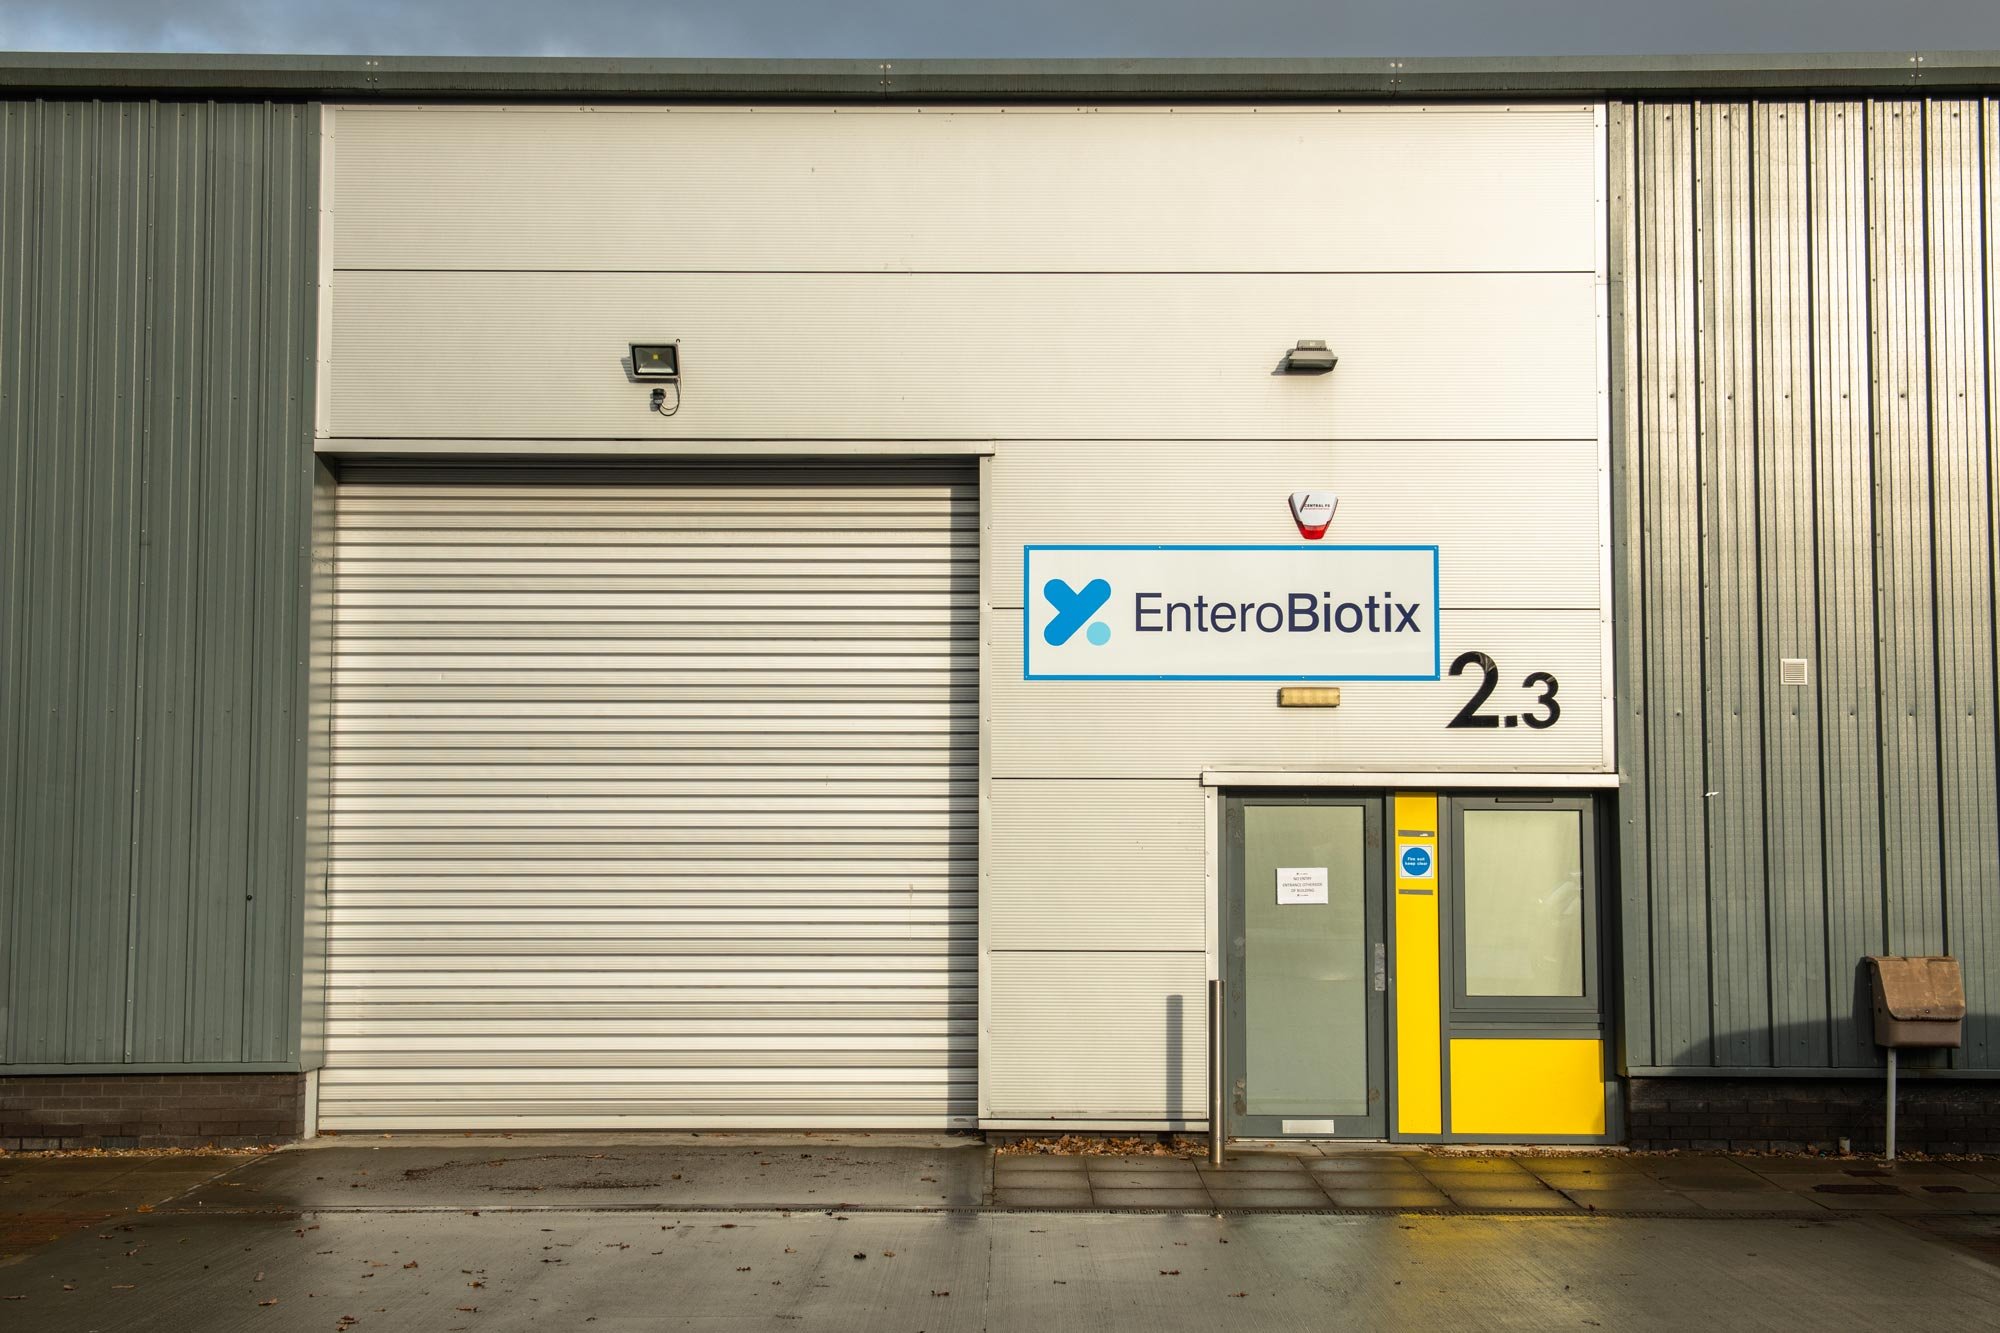 Exterior view of EnteroBiotix, Strathclyde Business Park facility in Glasgow